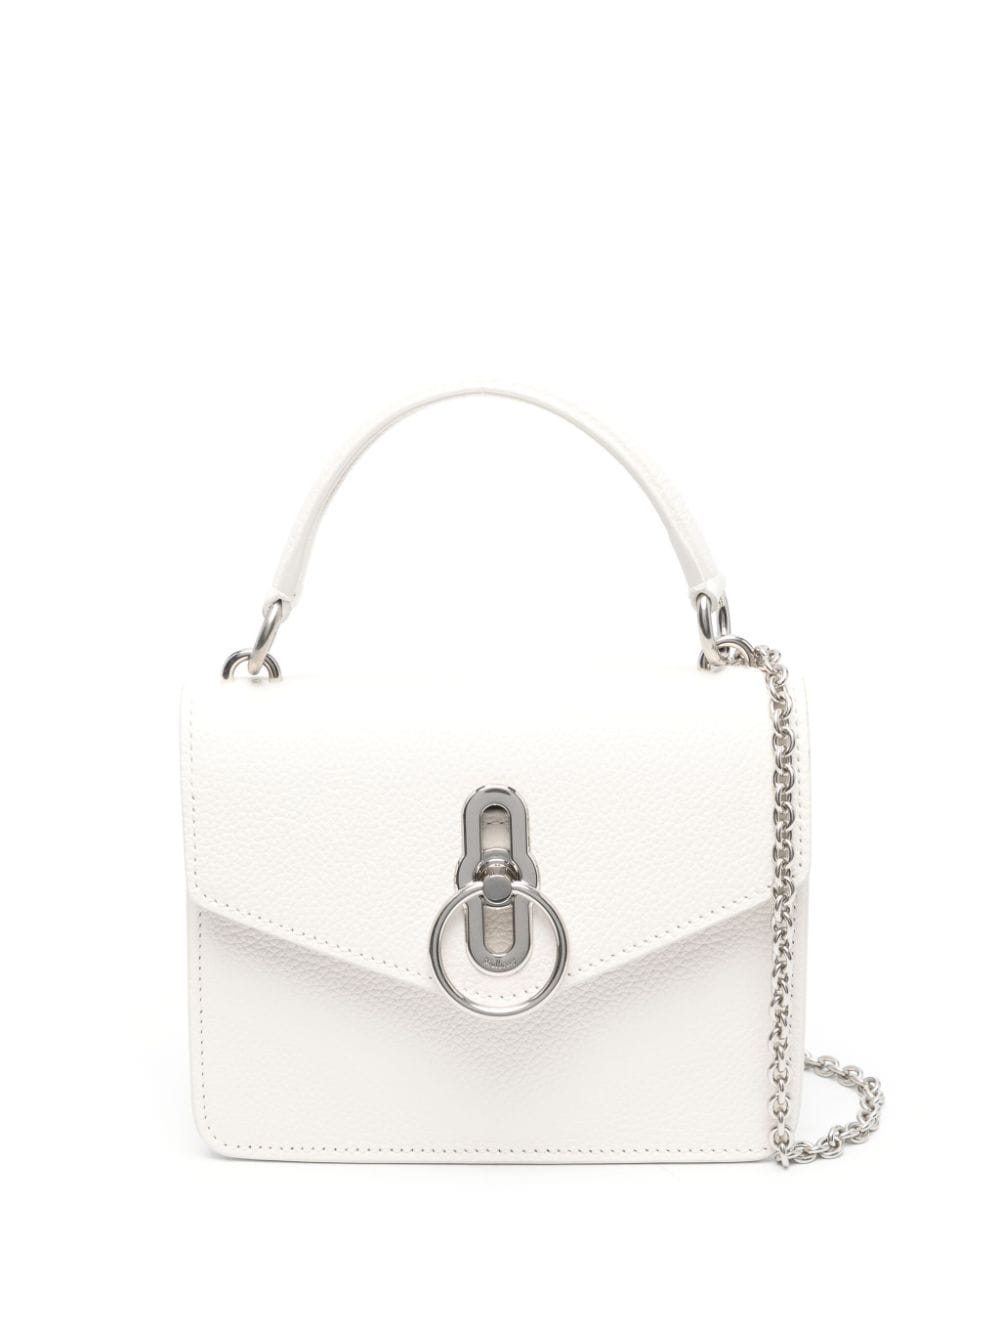 Mulberry small Amberley cross body bag - White von Mulberry